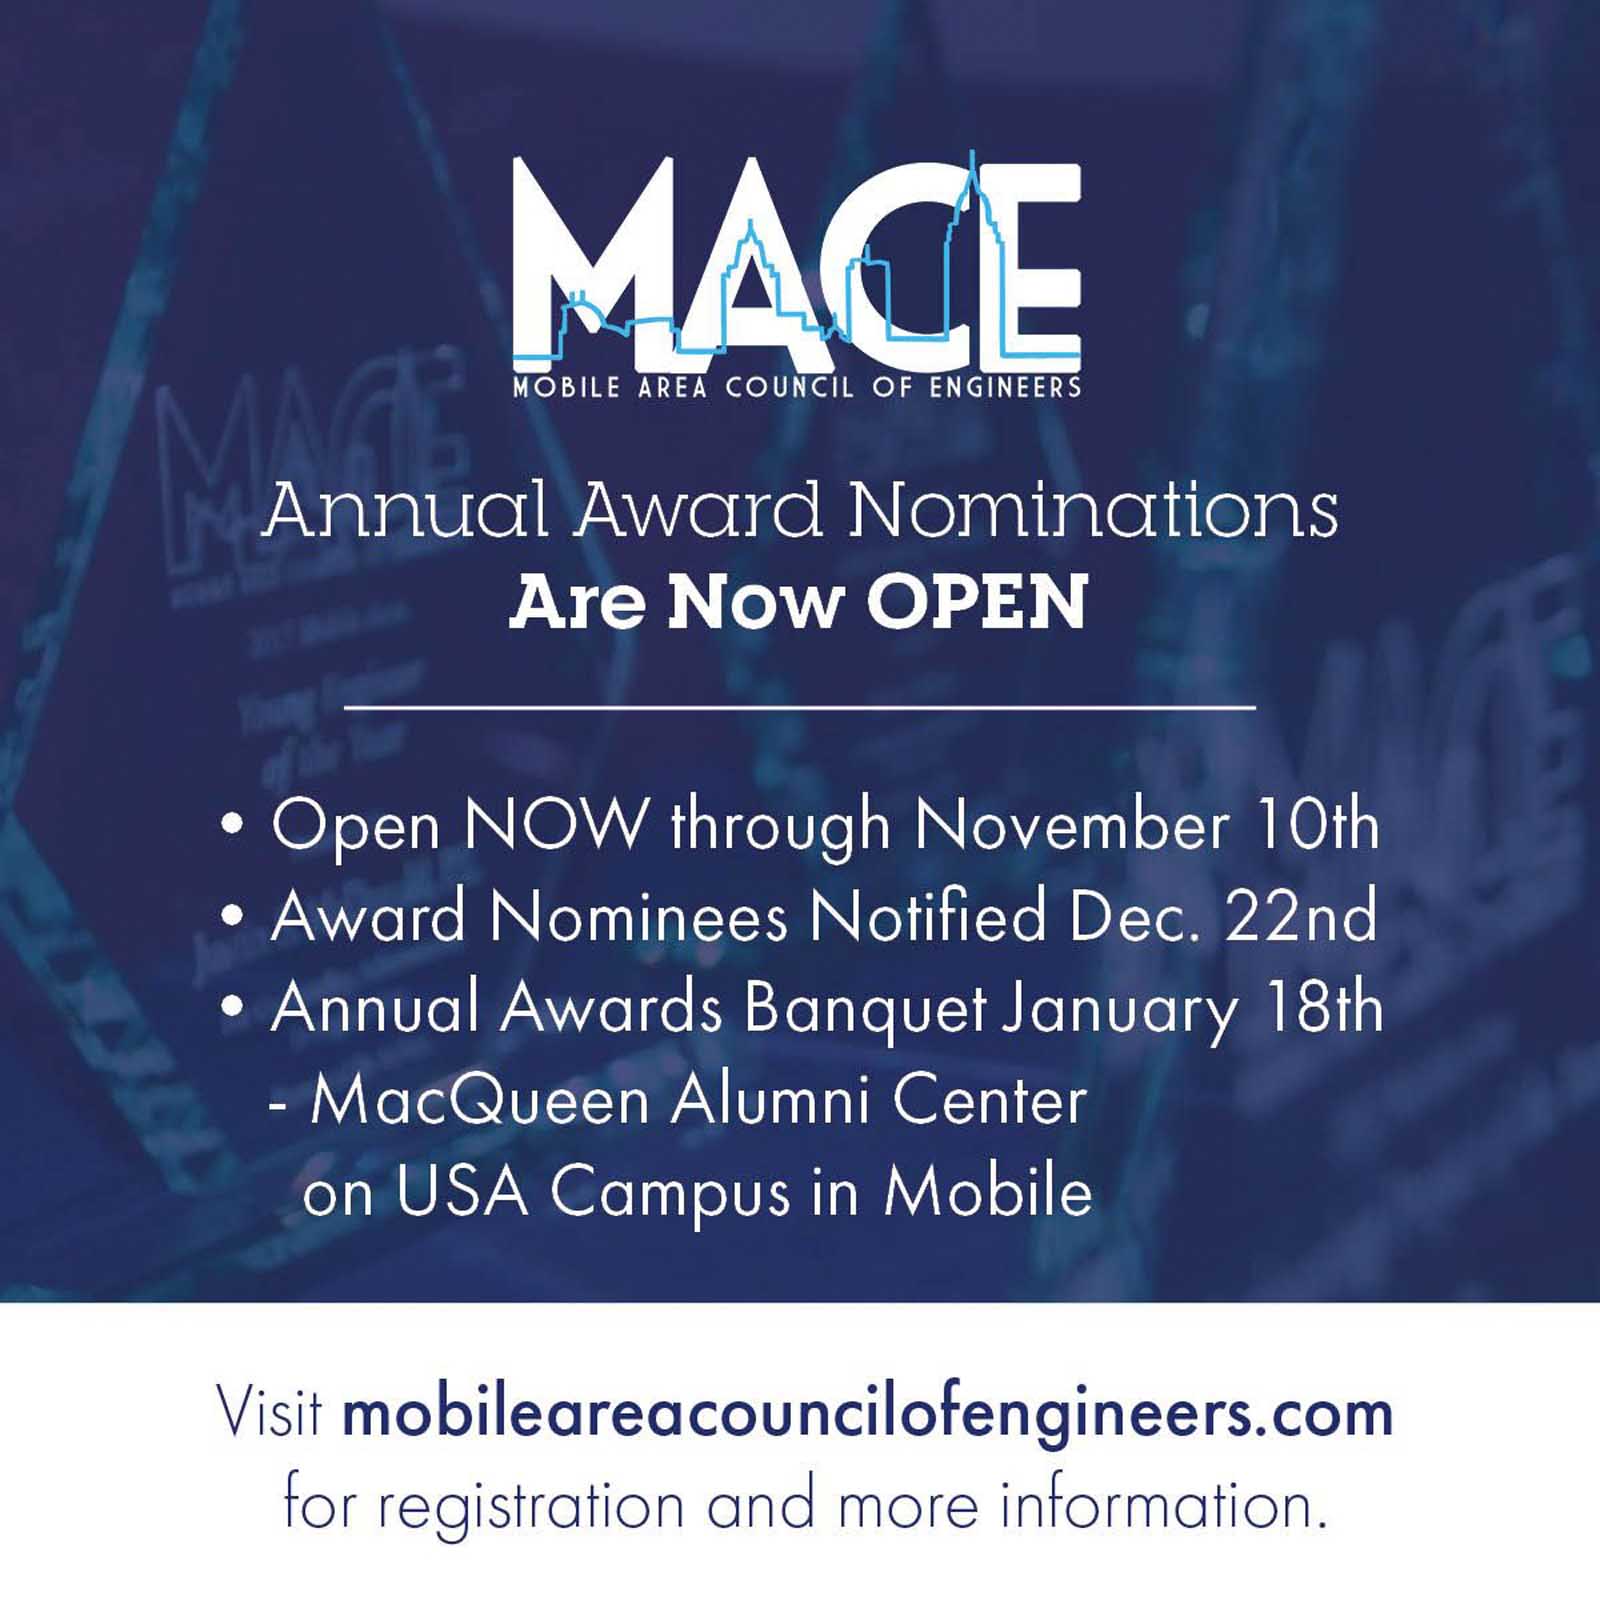 MACE Nomination Period Open